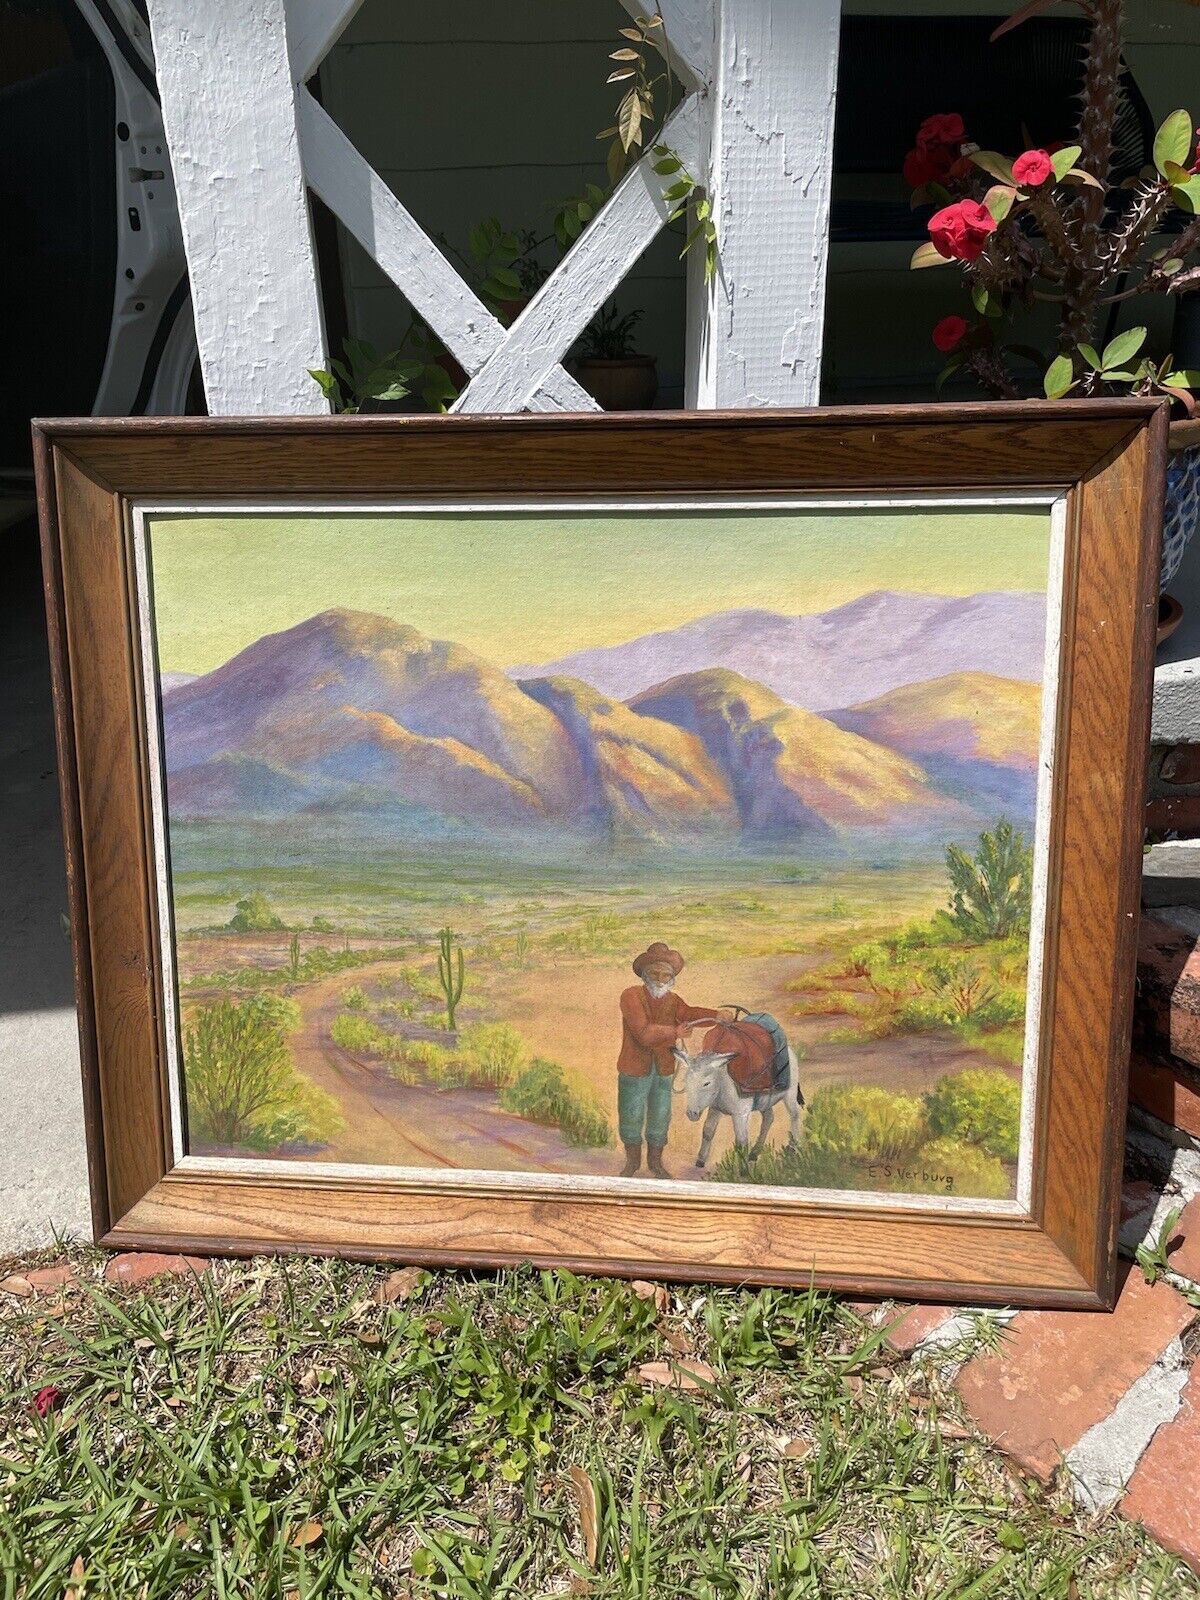 Vintage Oil Painting By E. S. Verburg 33inches x 27inches Framed